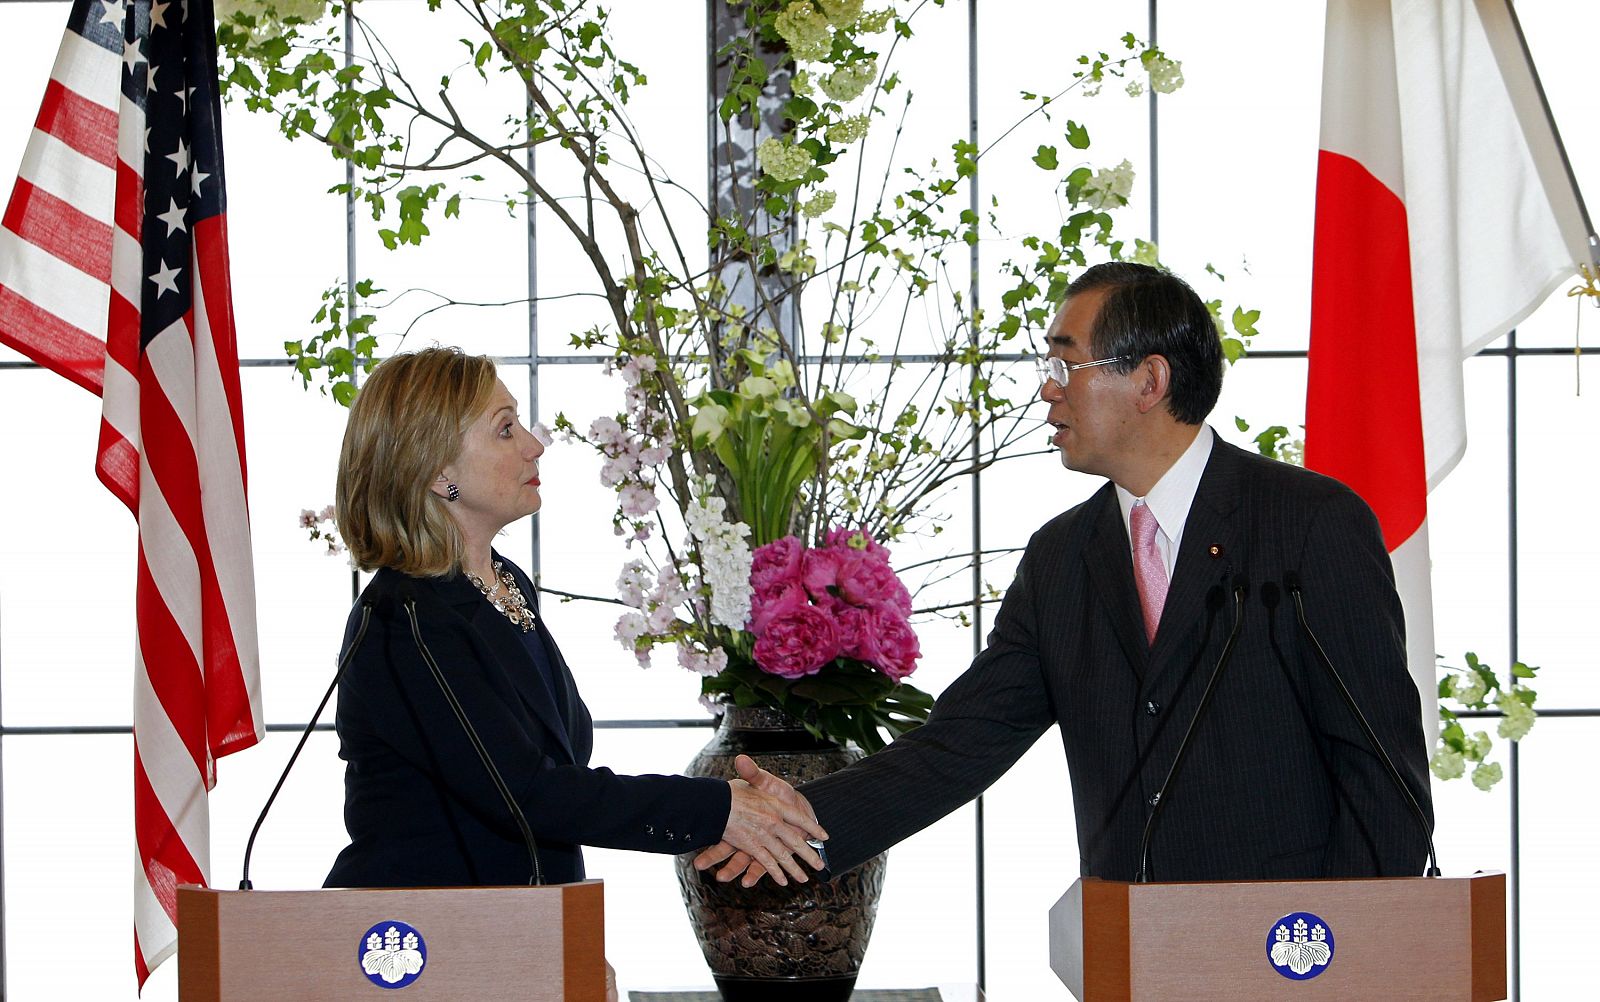 U.S. Secretary of State Clinton and Japan's Foreign Minister Matsumoto shake hands at the end of their joint news conference following meeting in Tokyo